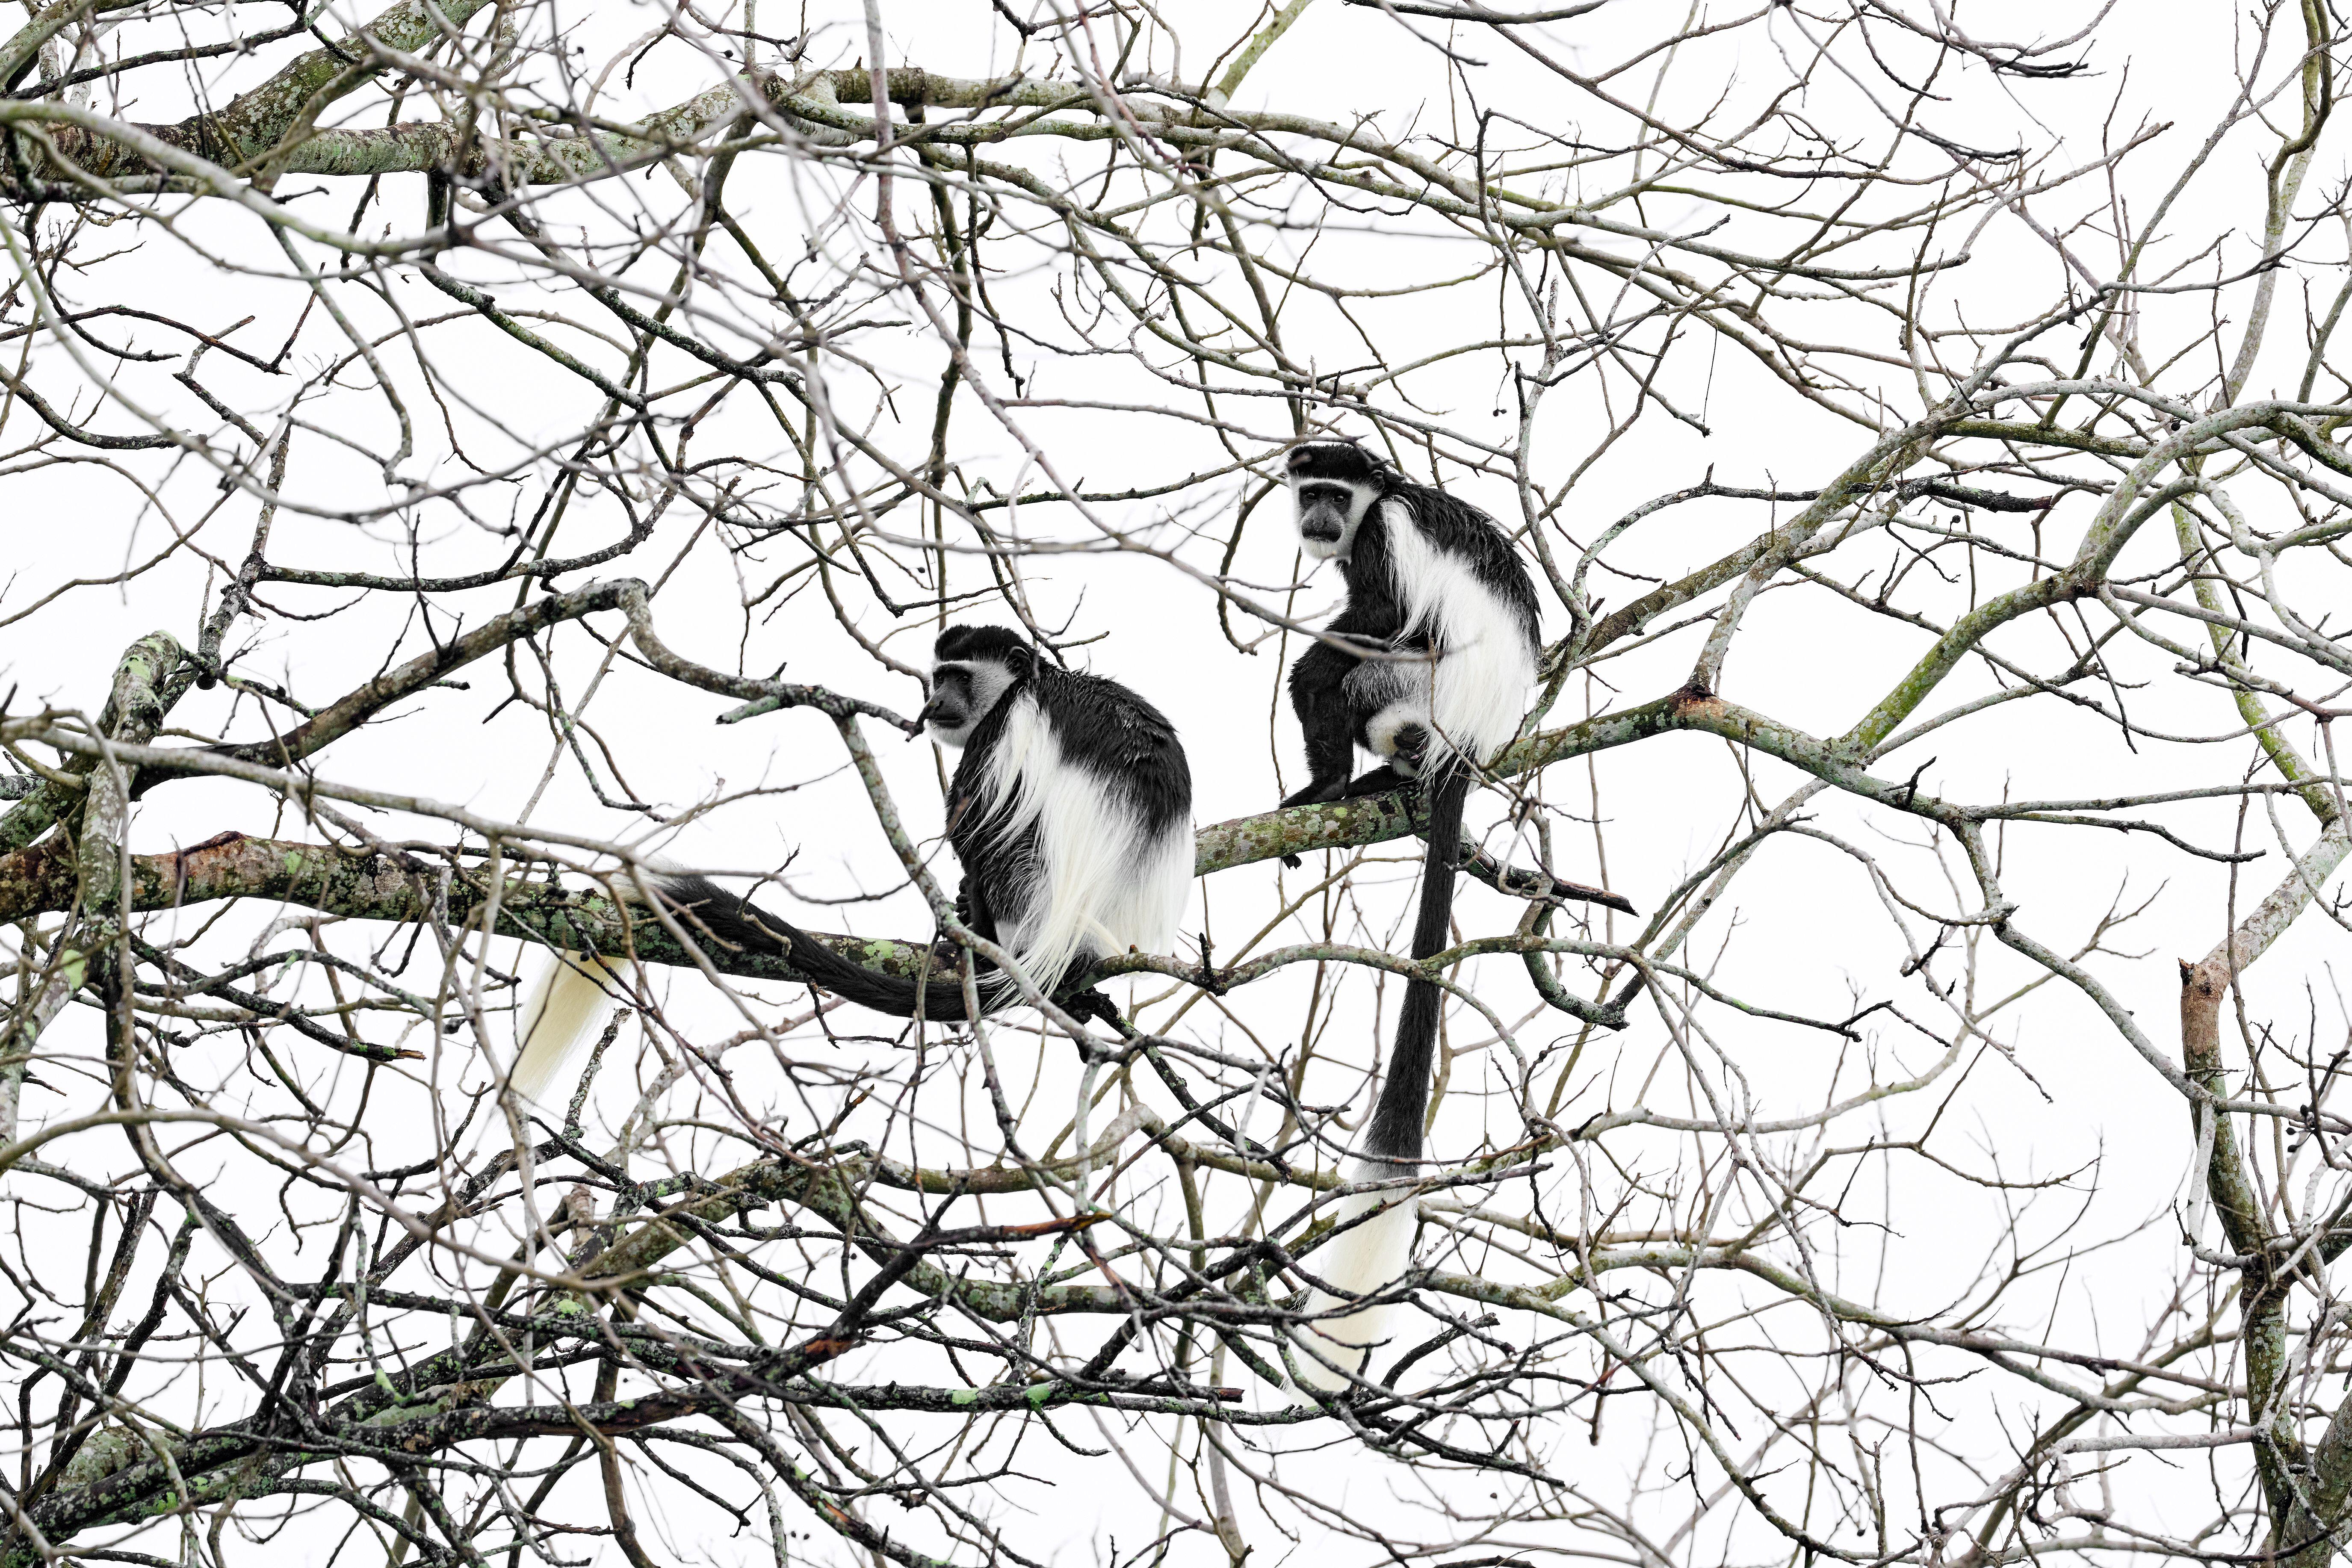 Two black and white, long-tailed monkeys sit in a leafless tree